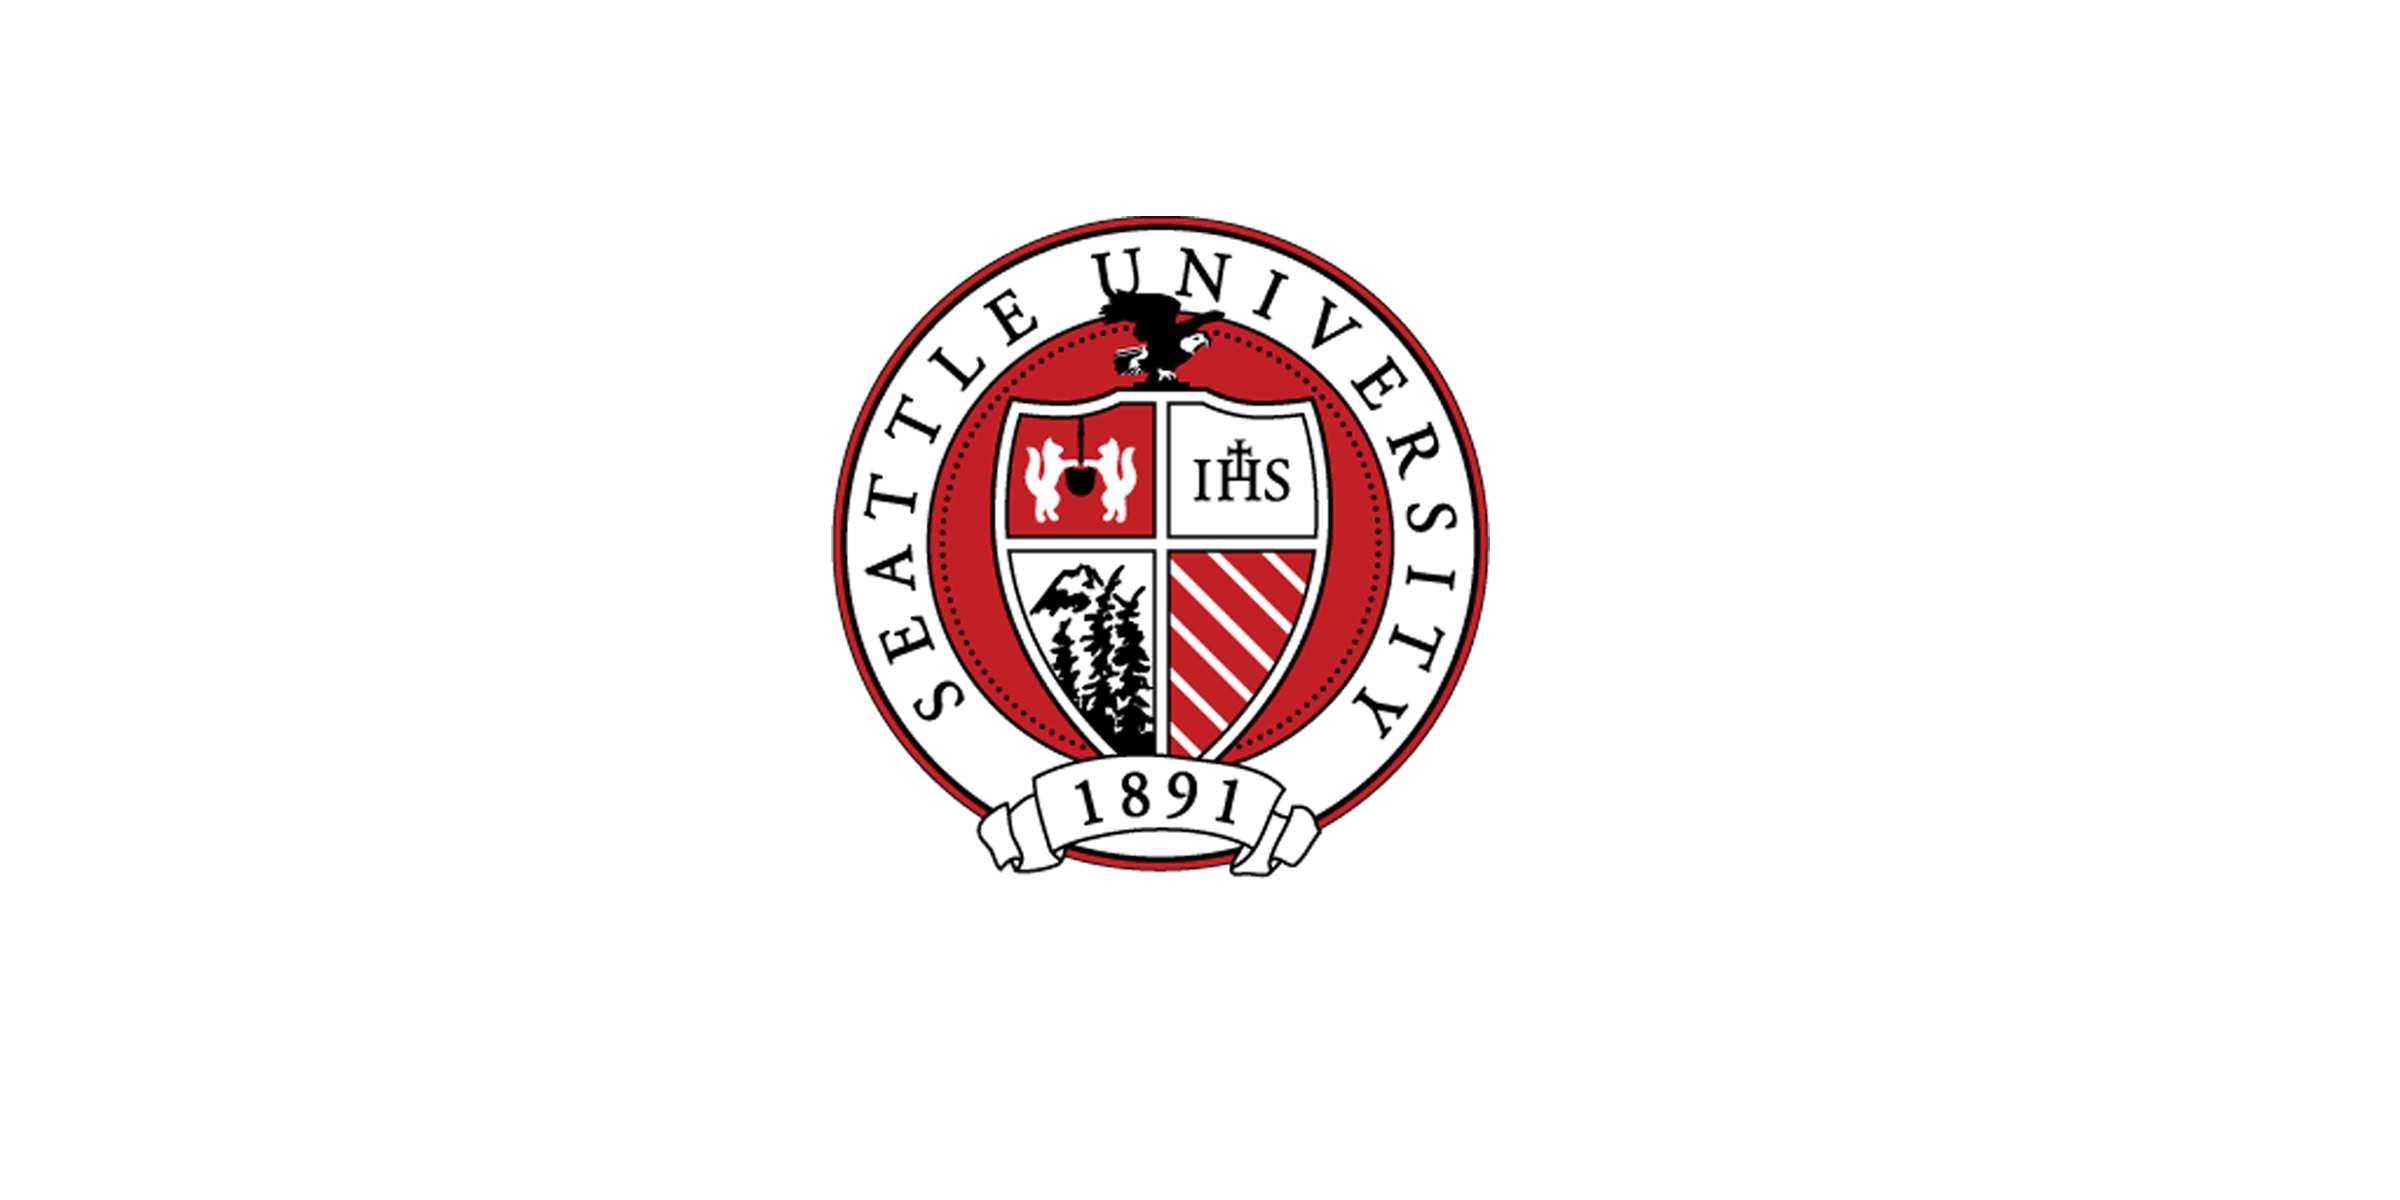 Official seal of Seattle University